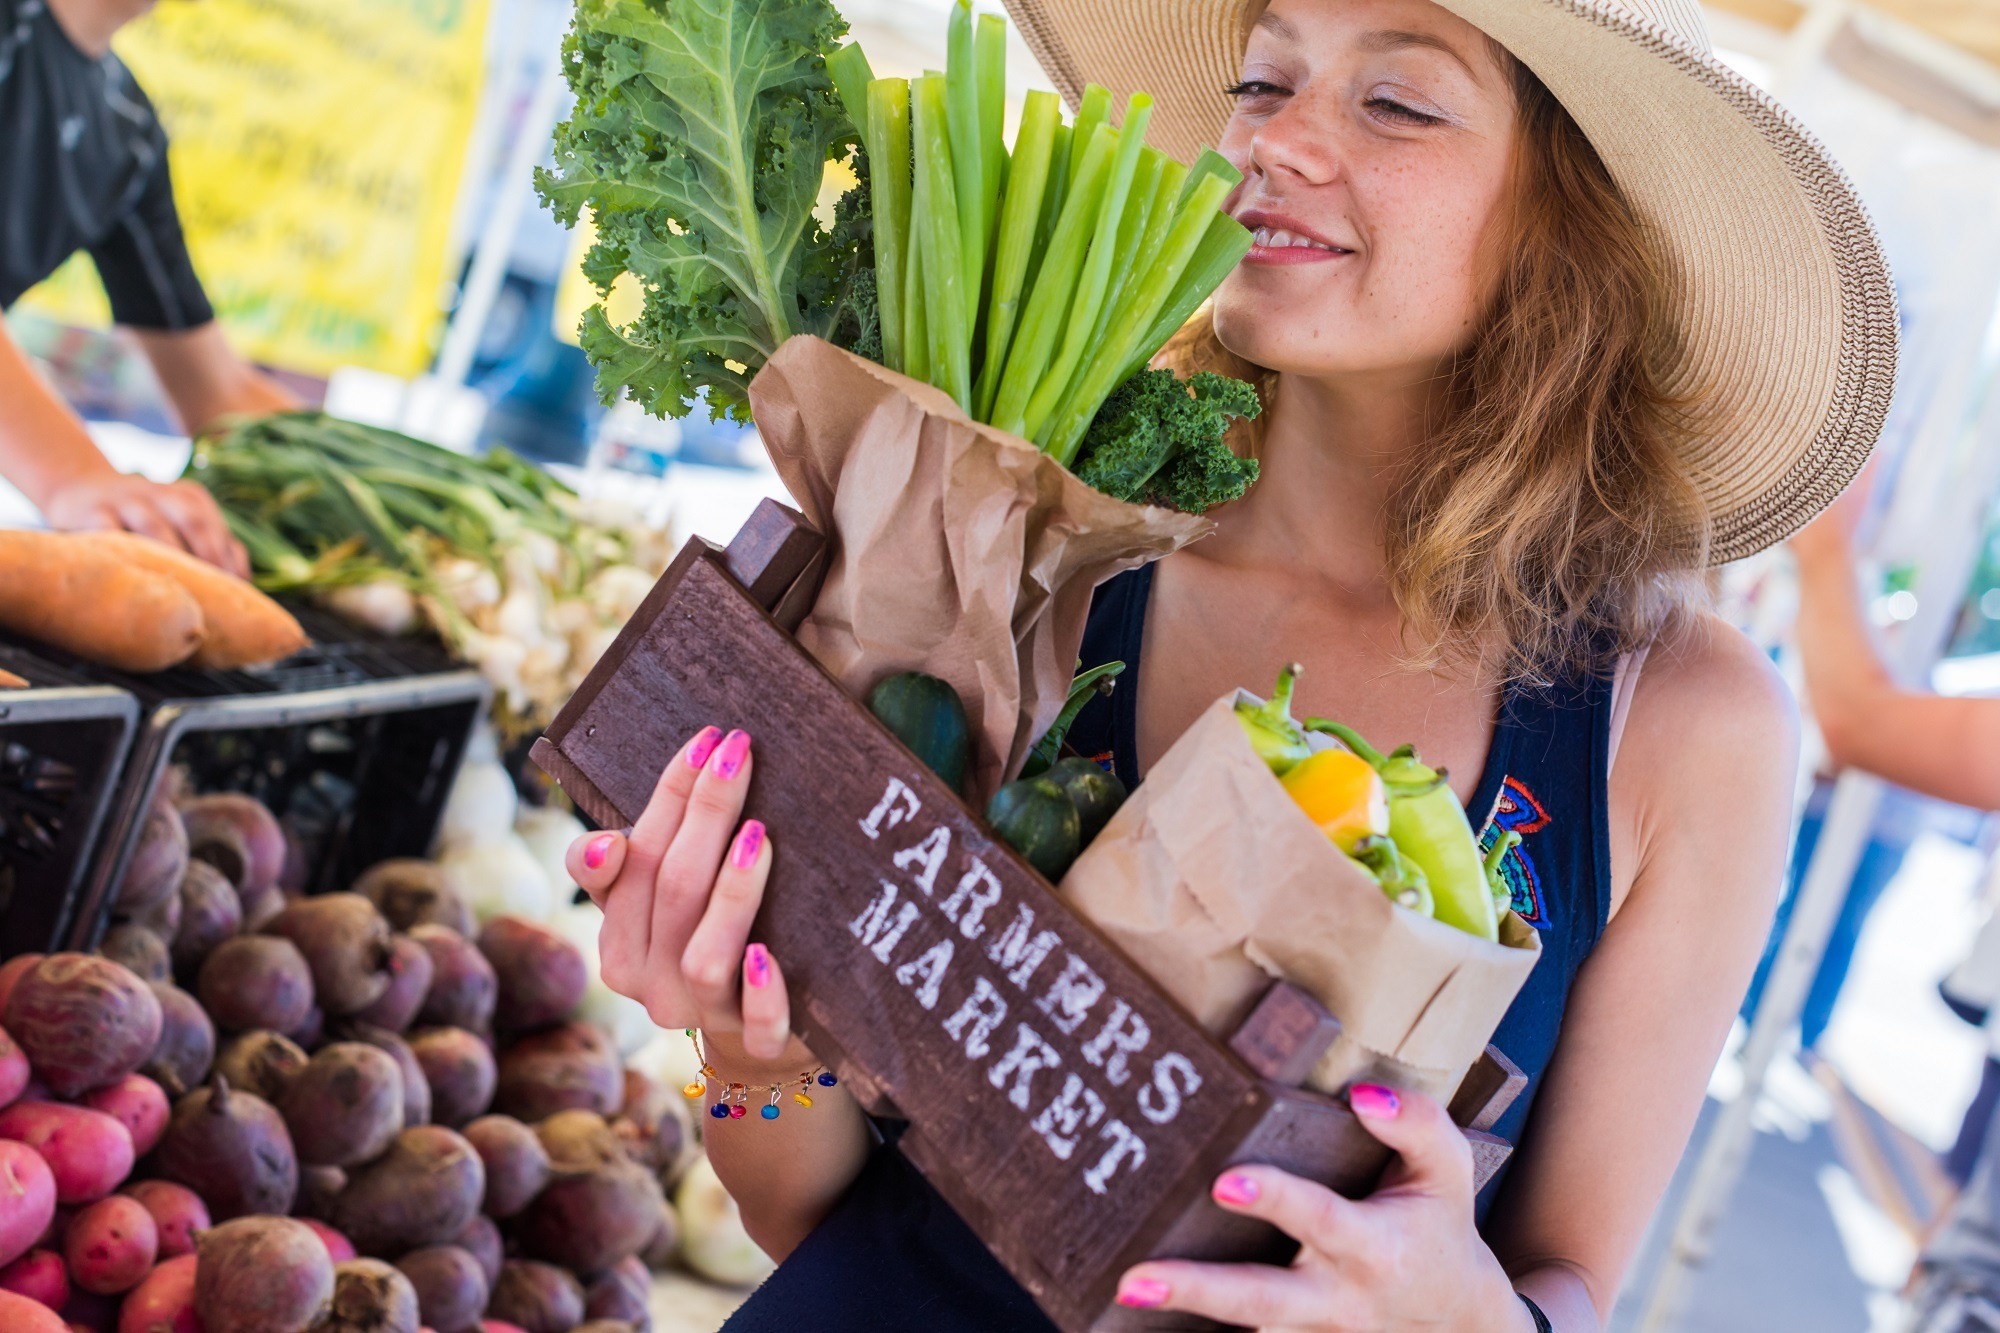 Young lady smiling and holding a box of produce at a farmers market